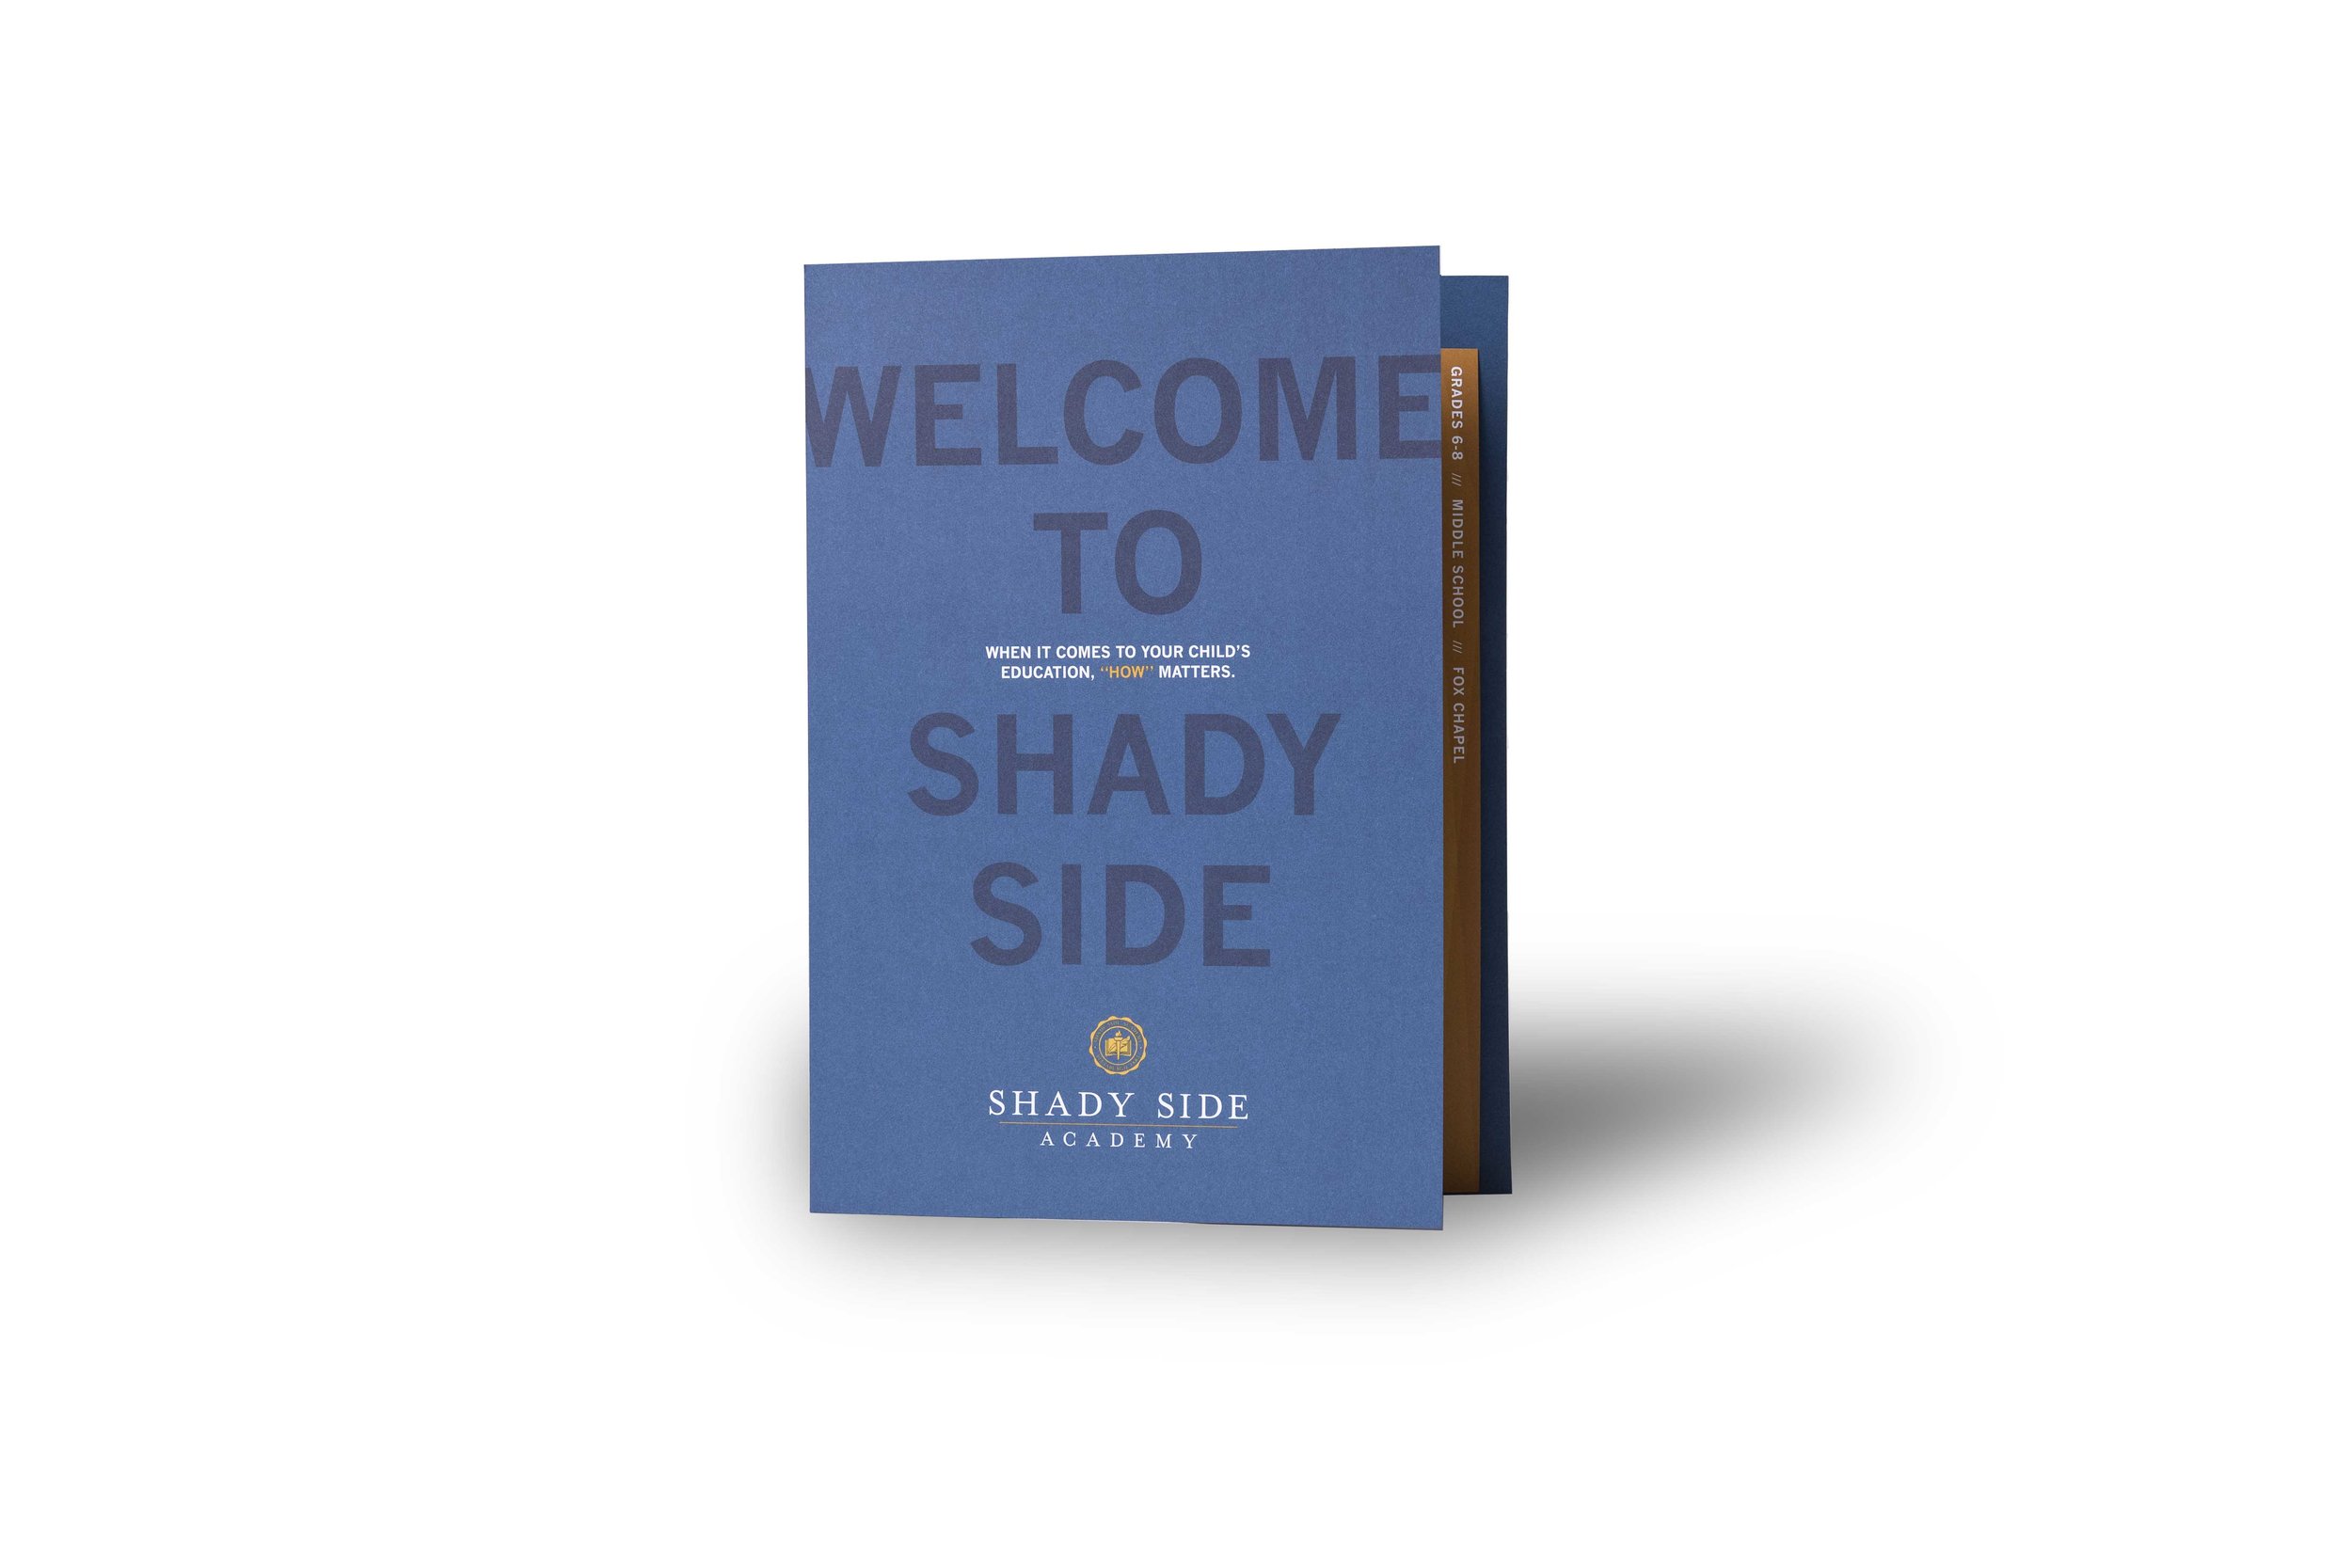 Shady-Side-Academy-Creosote-Affects-Acceptance-Package-Cover.jpg